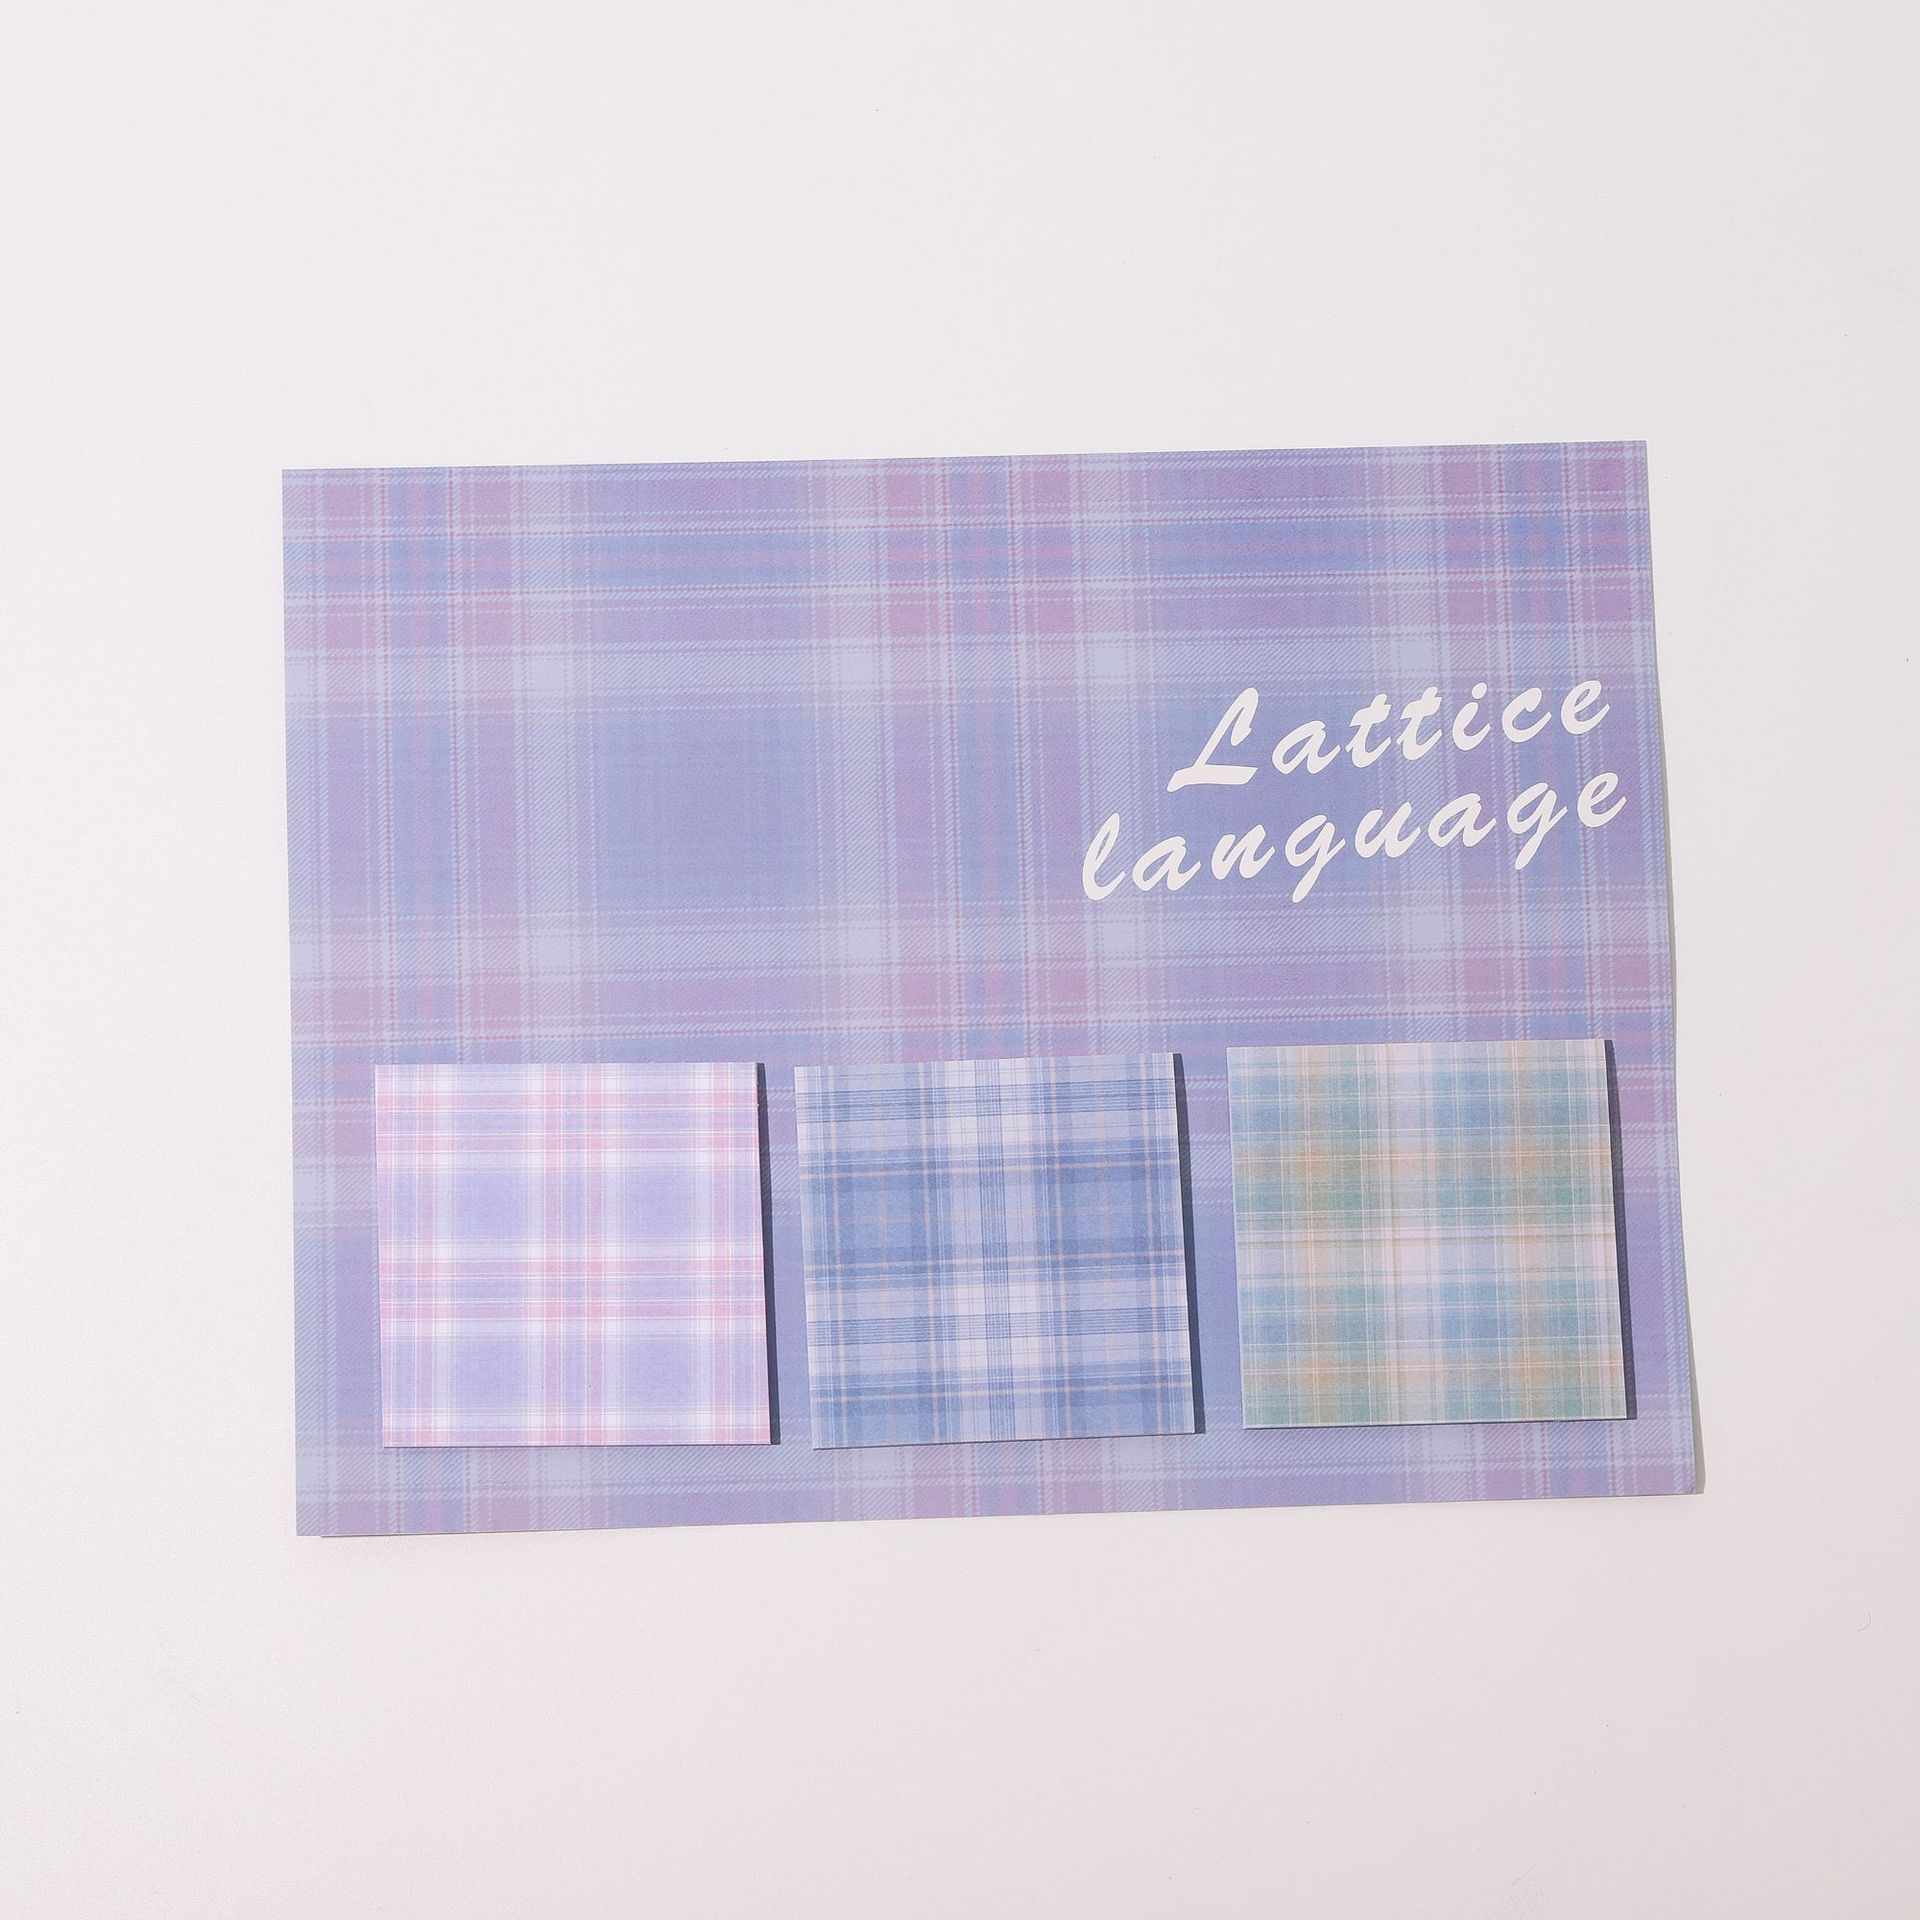 Lattice Storyins scenery sticky note the republic of korea originality N times paste student Hand account diy decorate source material Leaving a message. Notes Note Paper